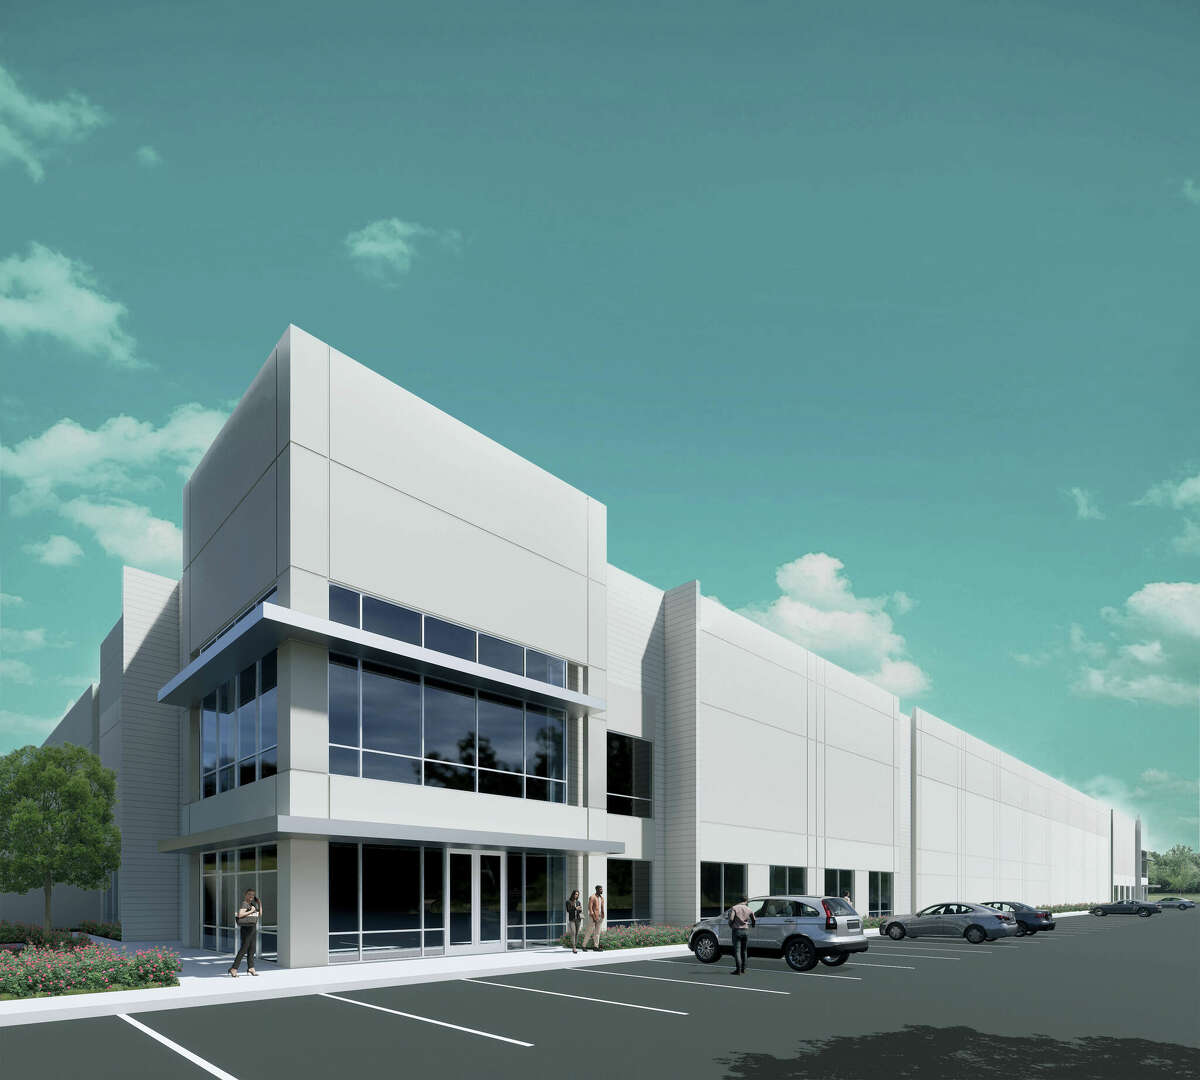 IDV has signed a 603,389-square-foot lease with a national third party logistics provider at South Belt Central Business Park.